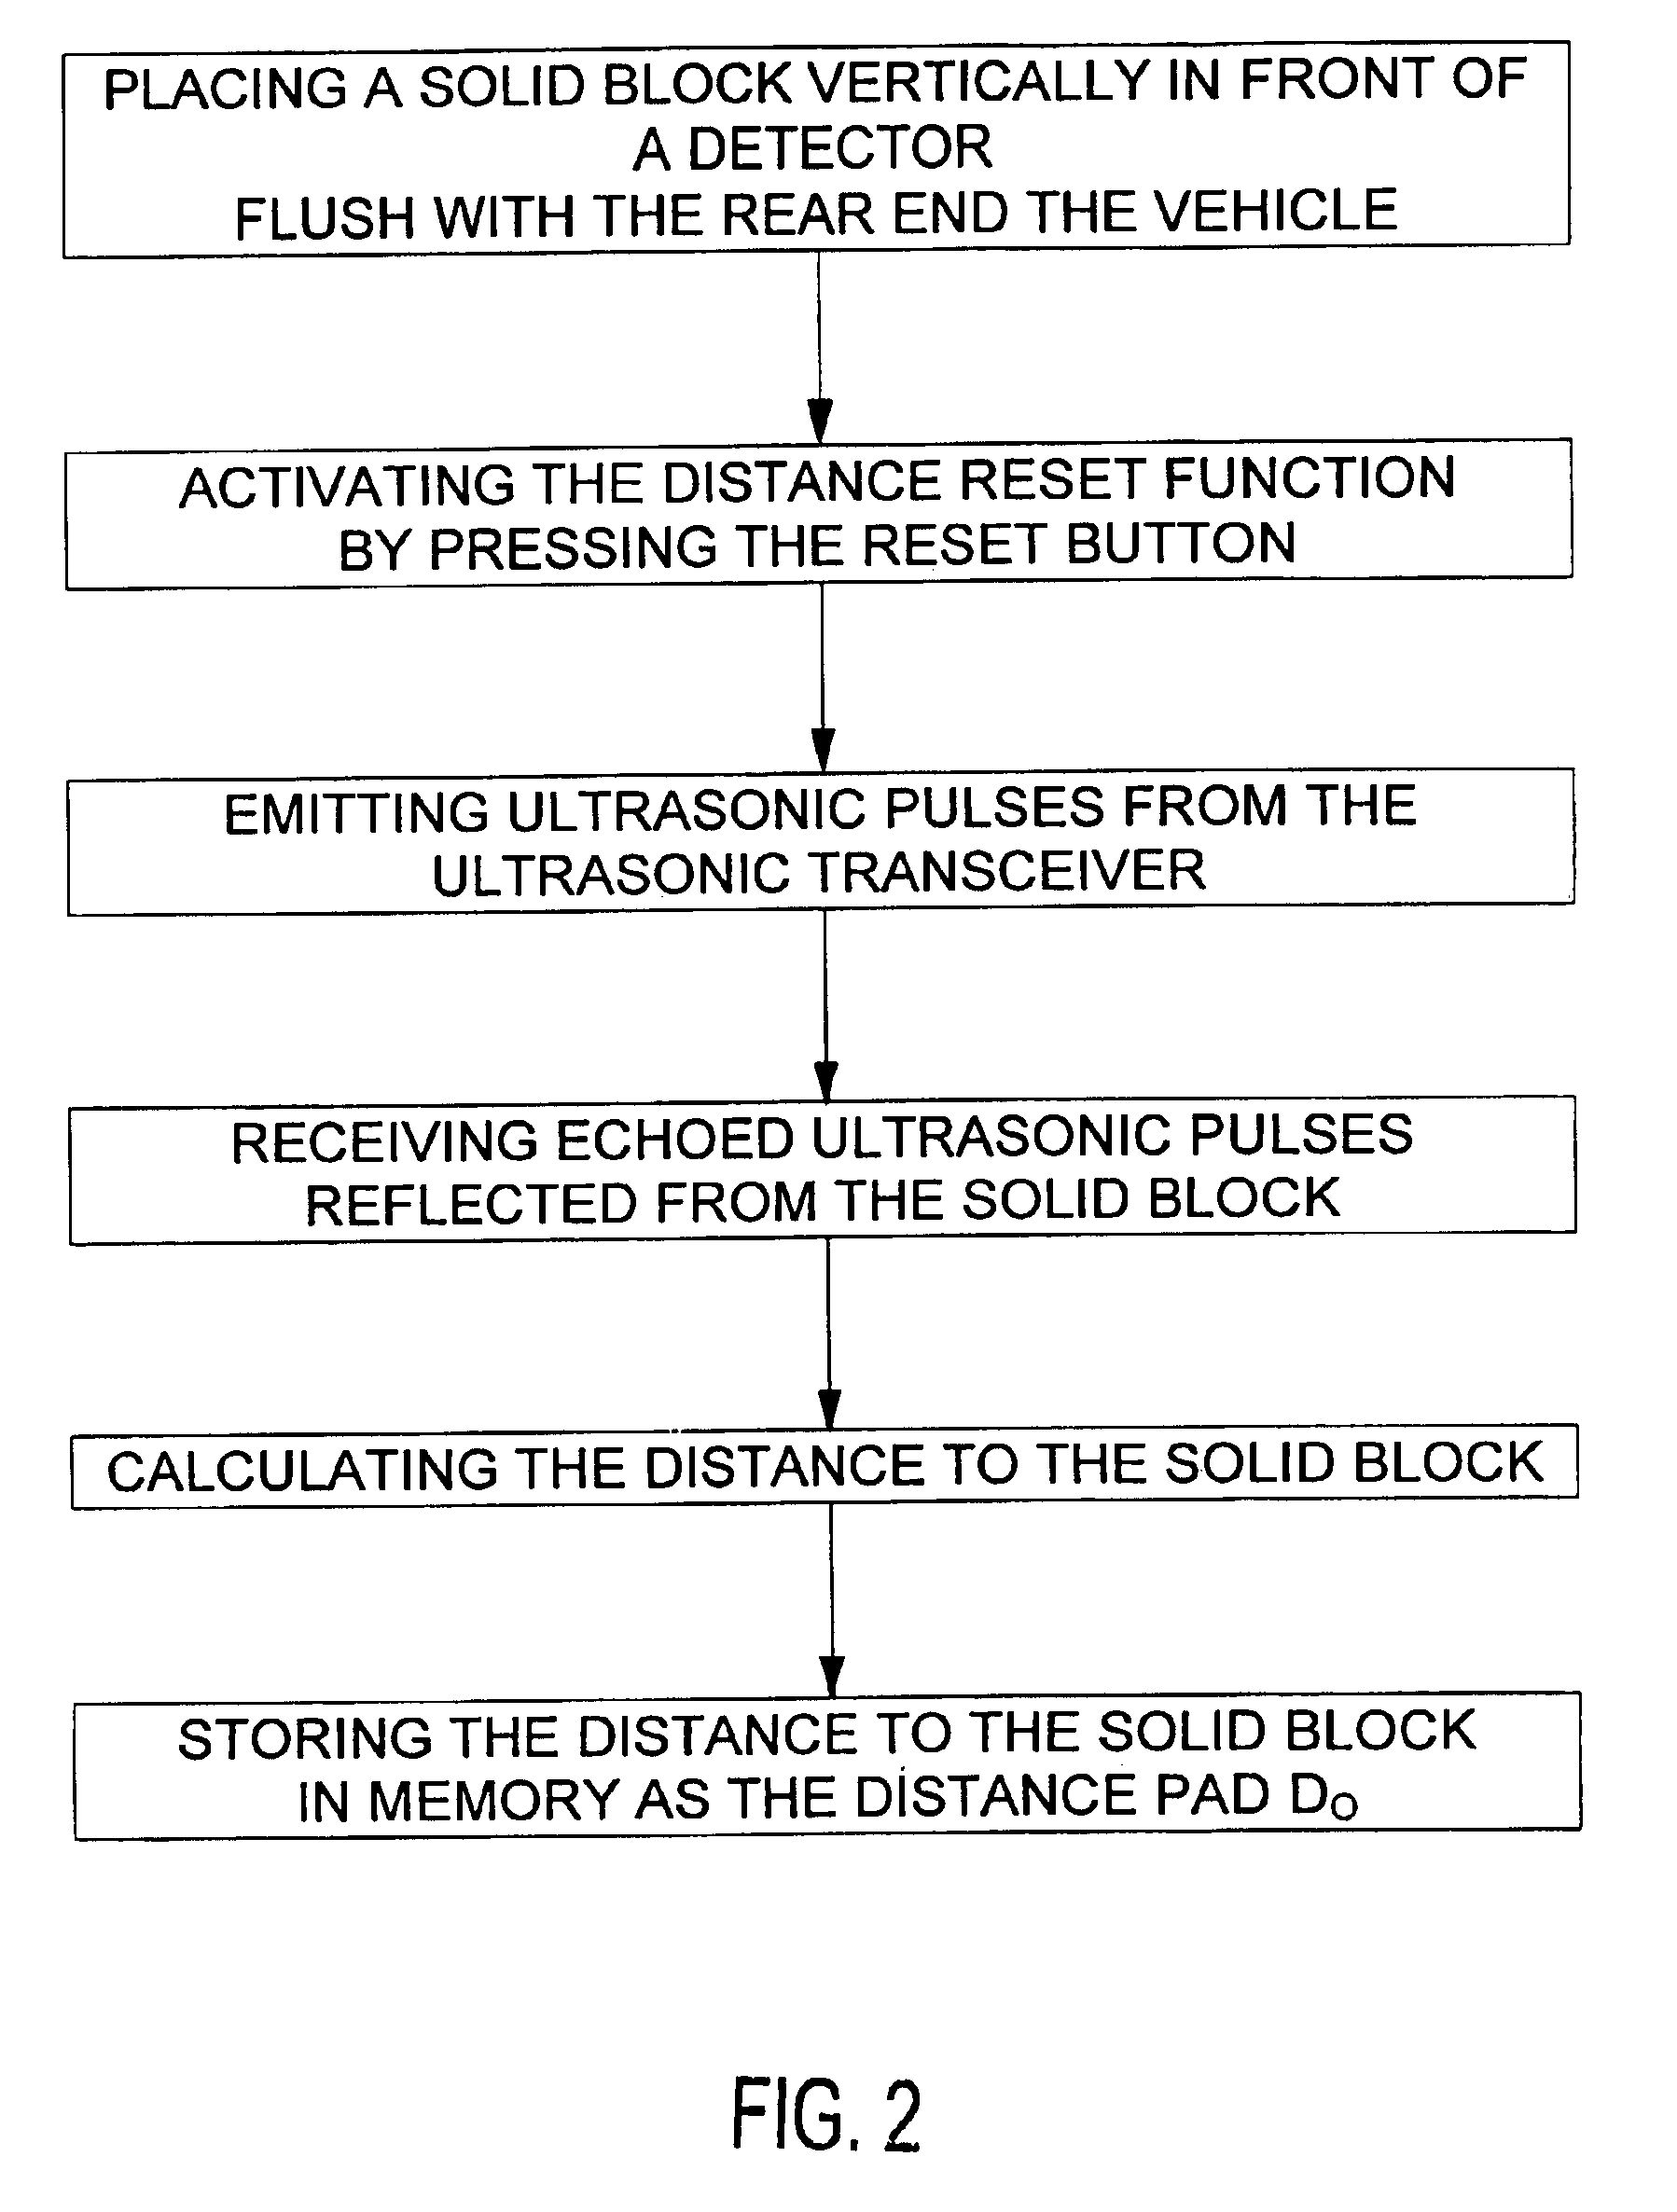 Back-up detecting device with a distance reset capability